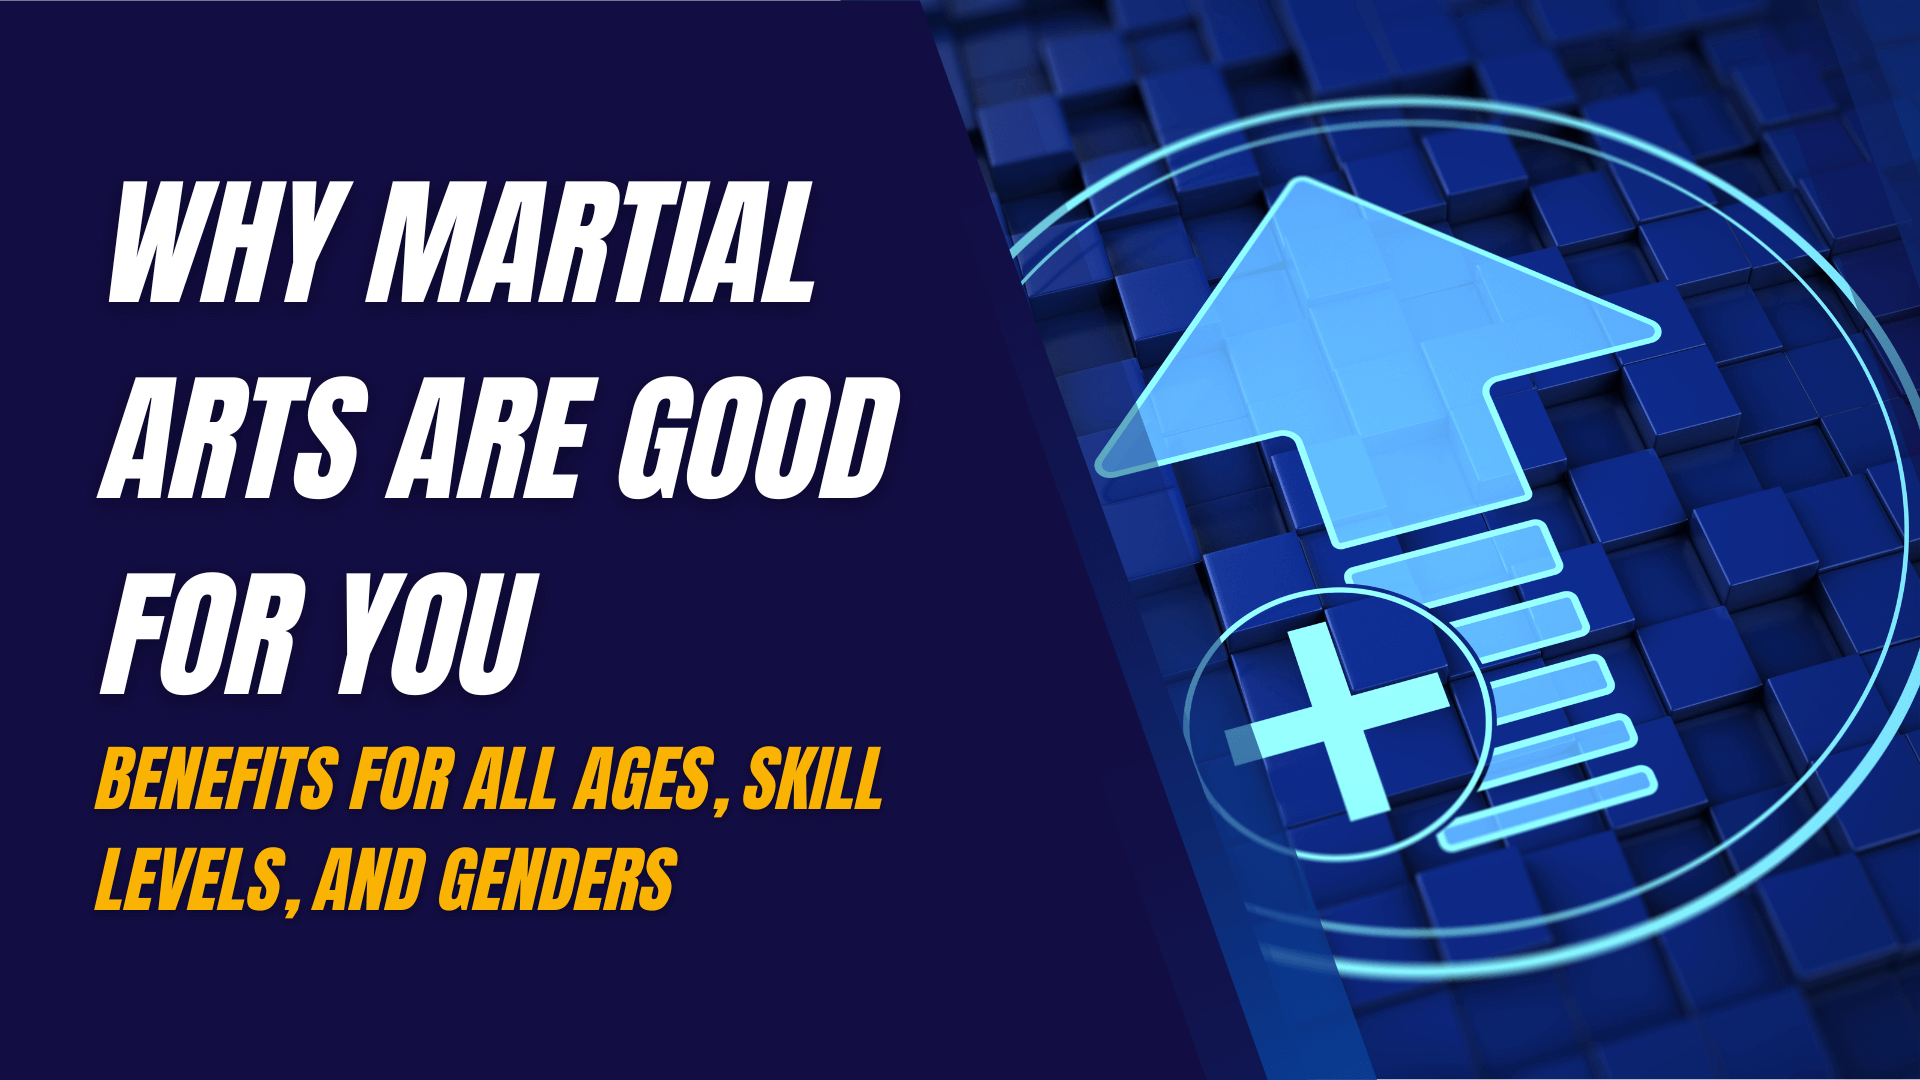 Why Martial Arts Are Good for You: Benefits for All Ages, Skill Levels, and Genders